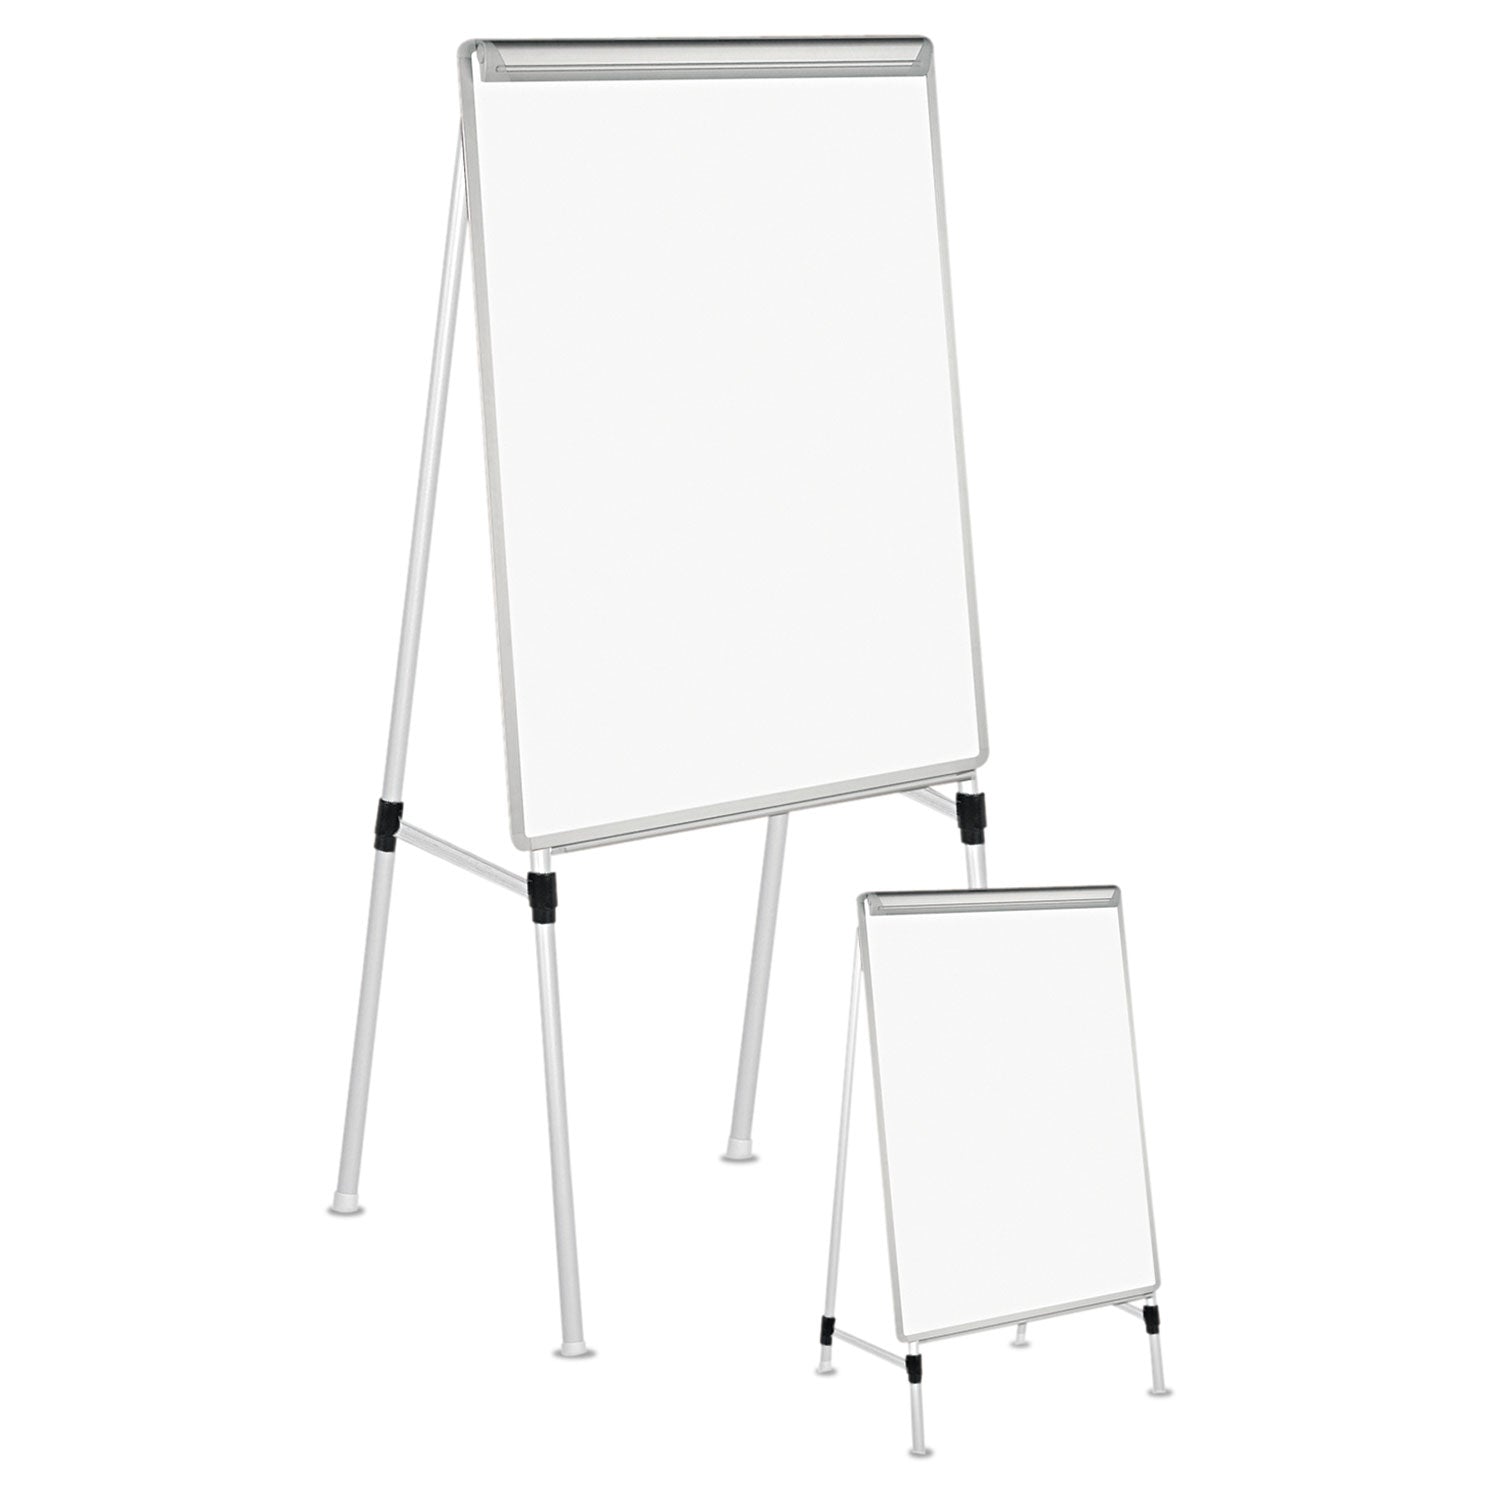 Dry Erase Board with A-Frame Easel, 29 x 41, White Surface, Silver Frame - 